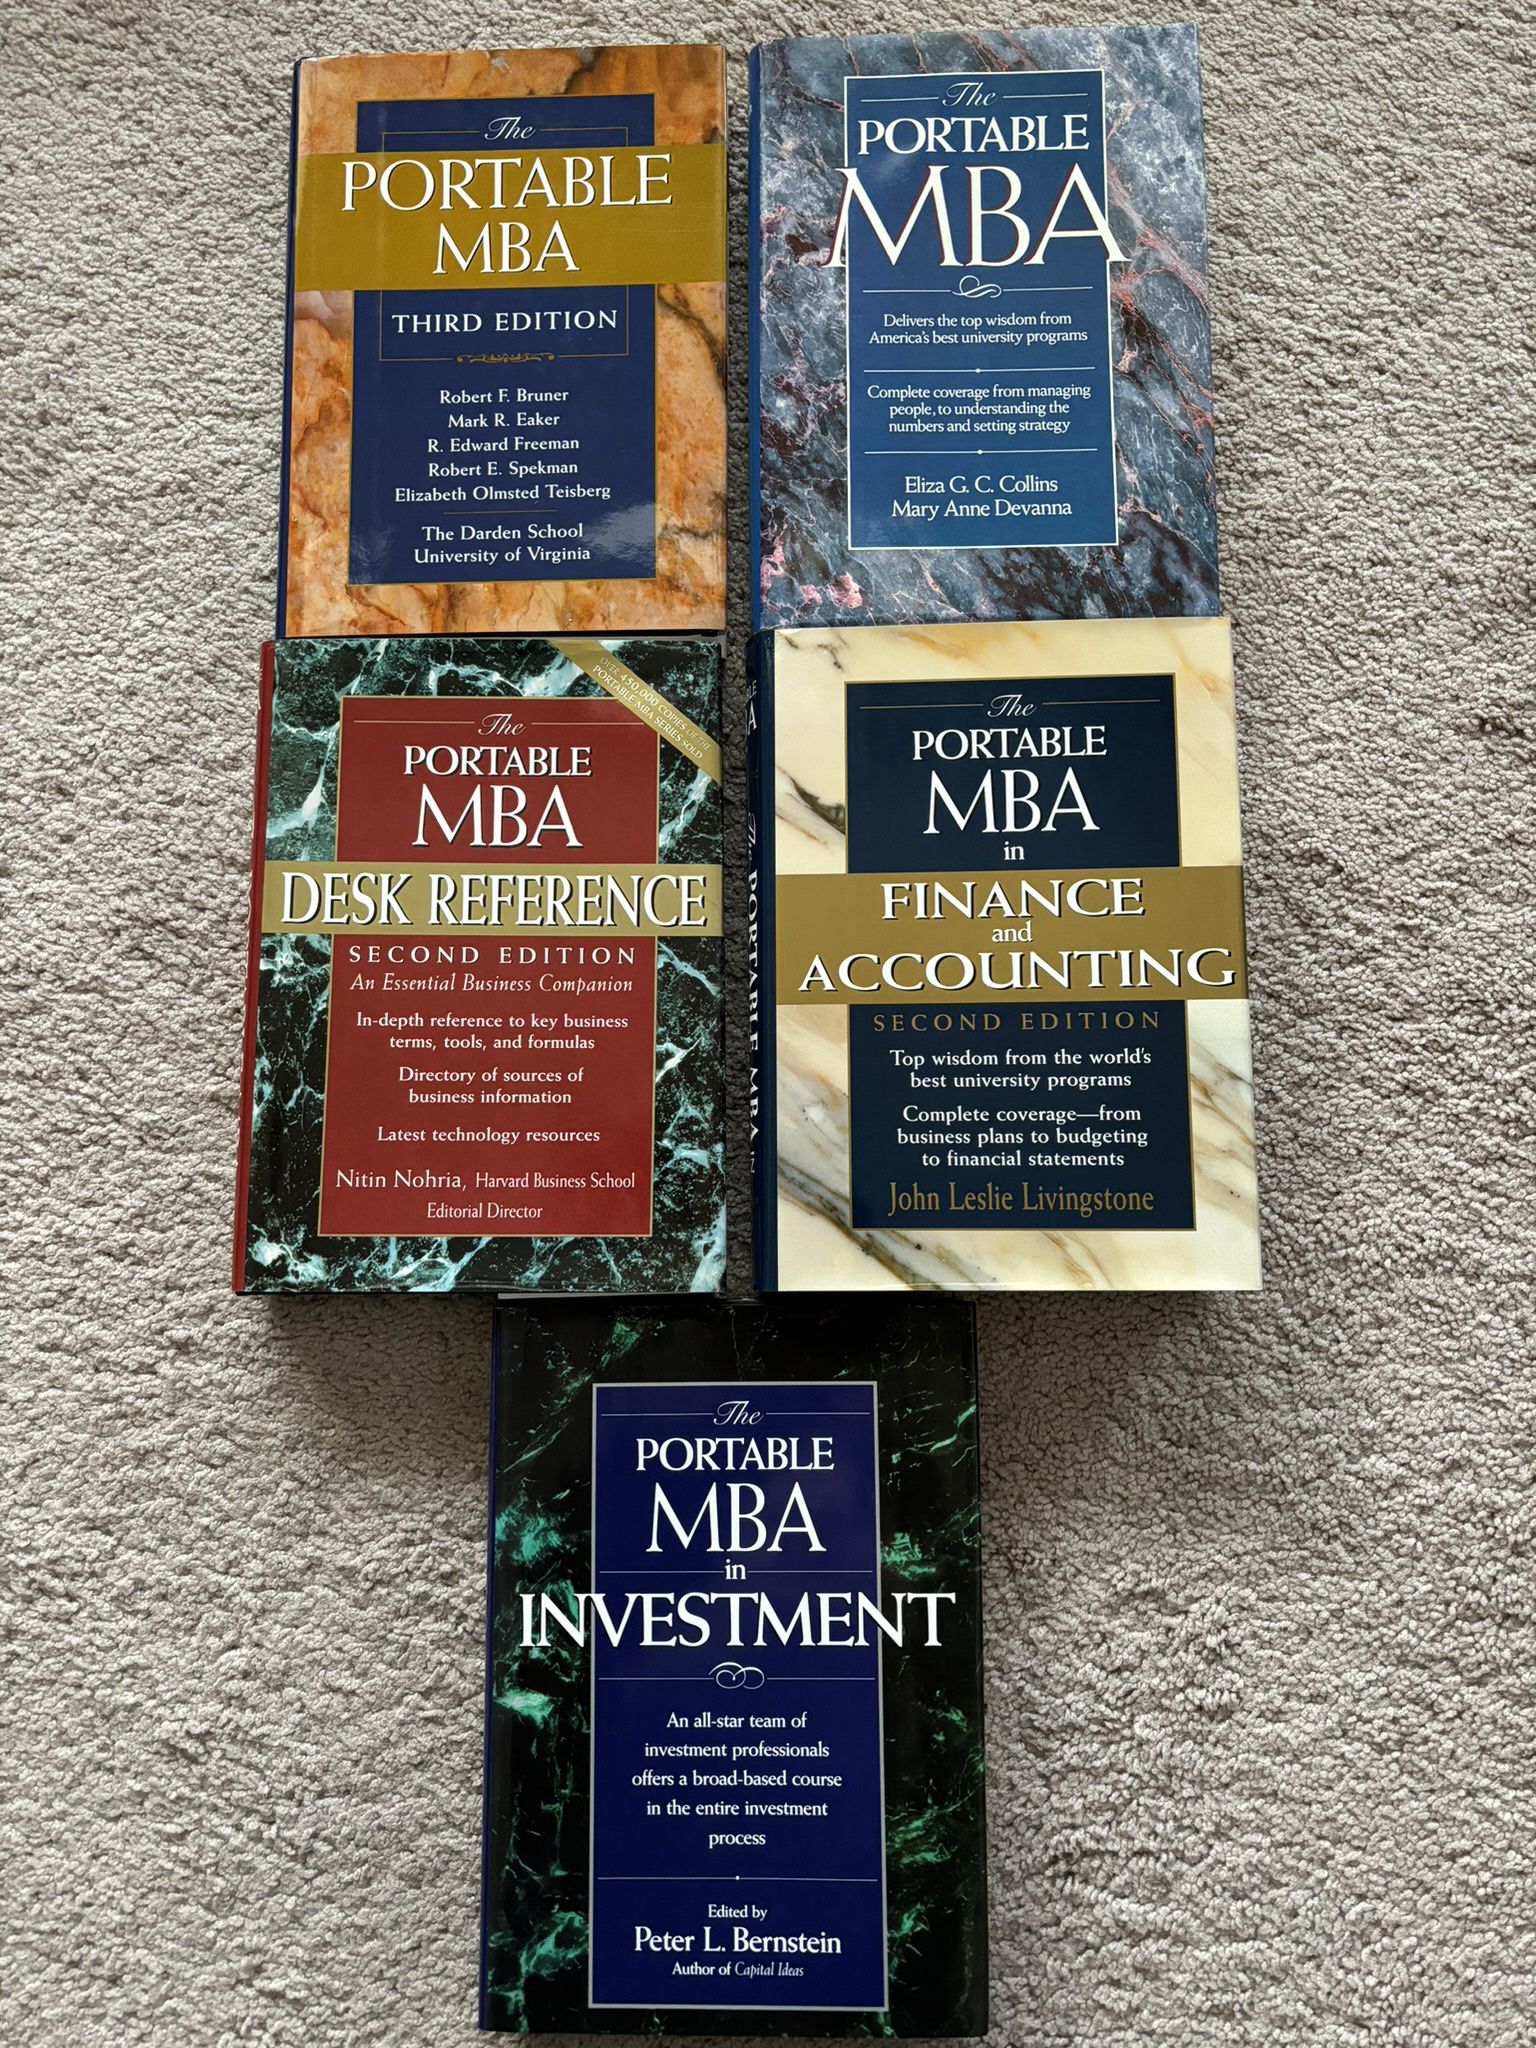 Classic The Portable MBA Book Set.  Lot of 5 books, new condition.  Bestselling The Portable MBA, The Portable MBA Desk Reference, The Portable MBA In